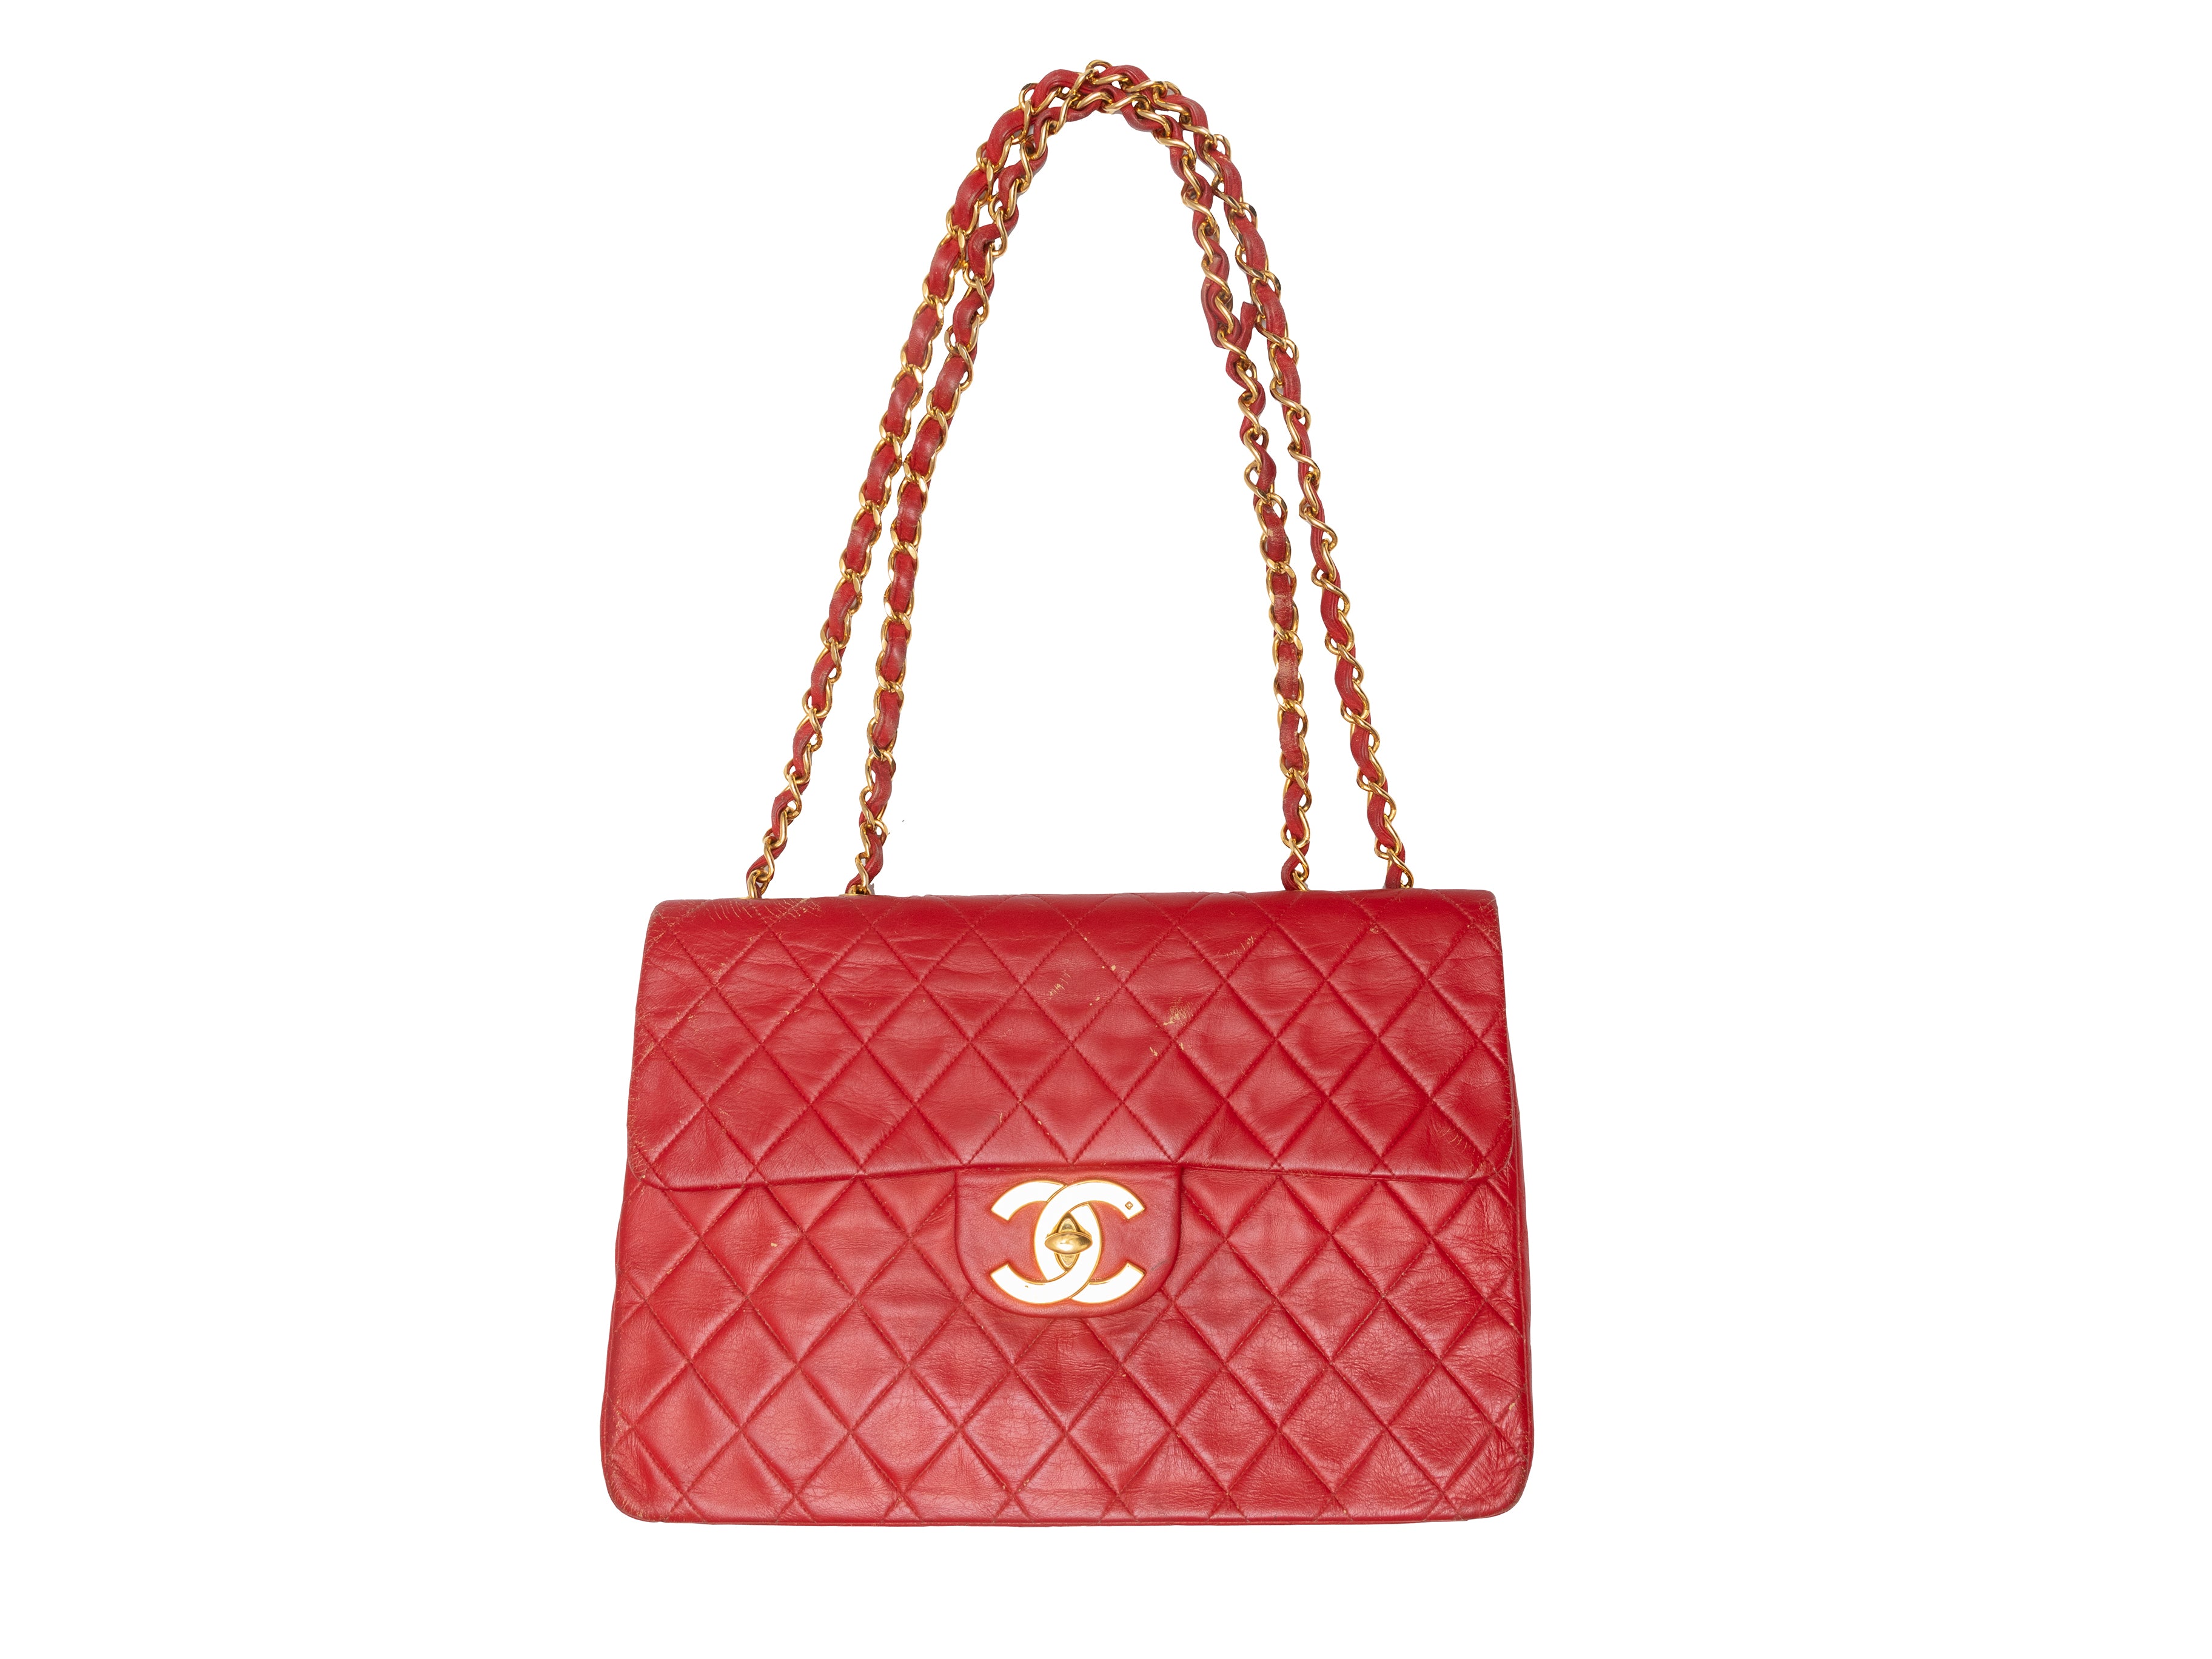 red chanel flap bag with top handle leather